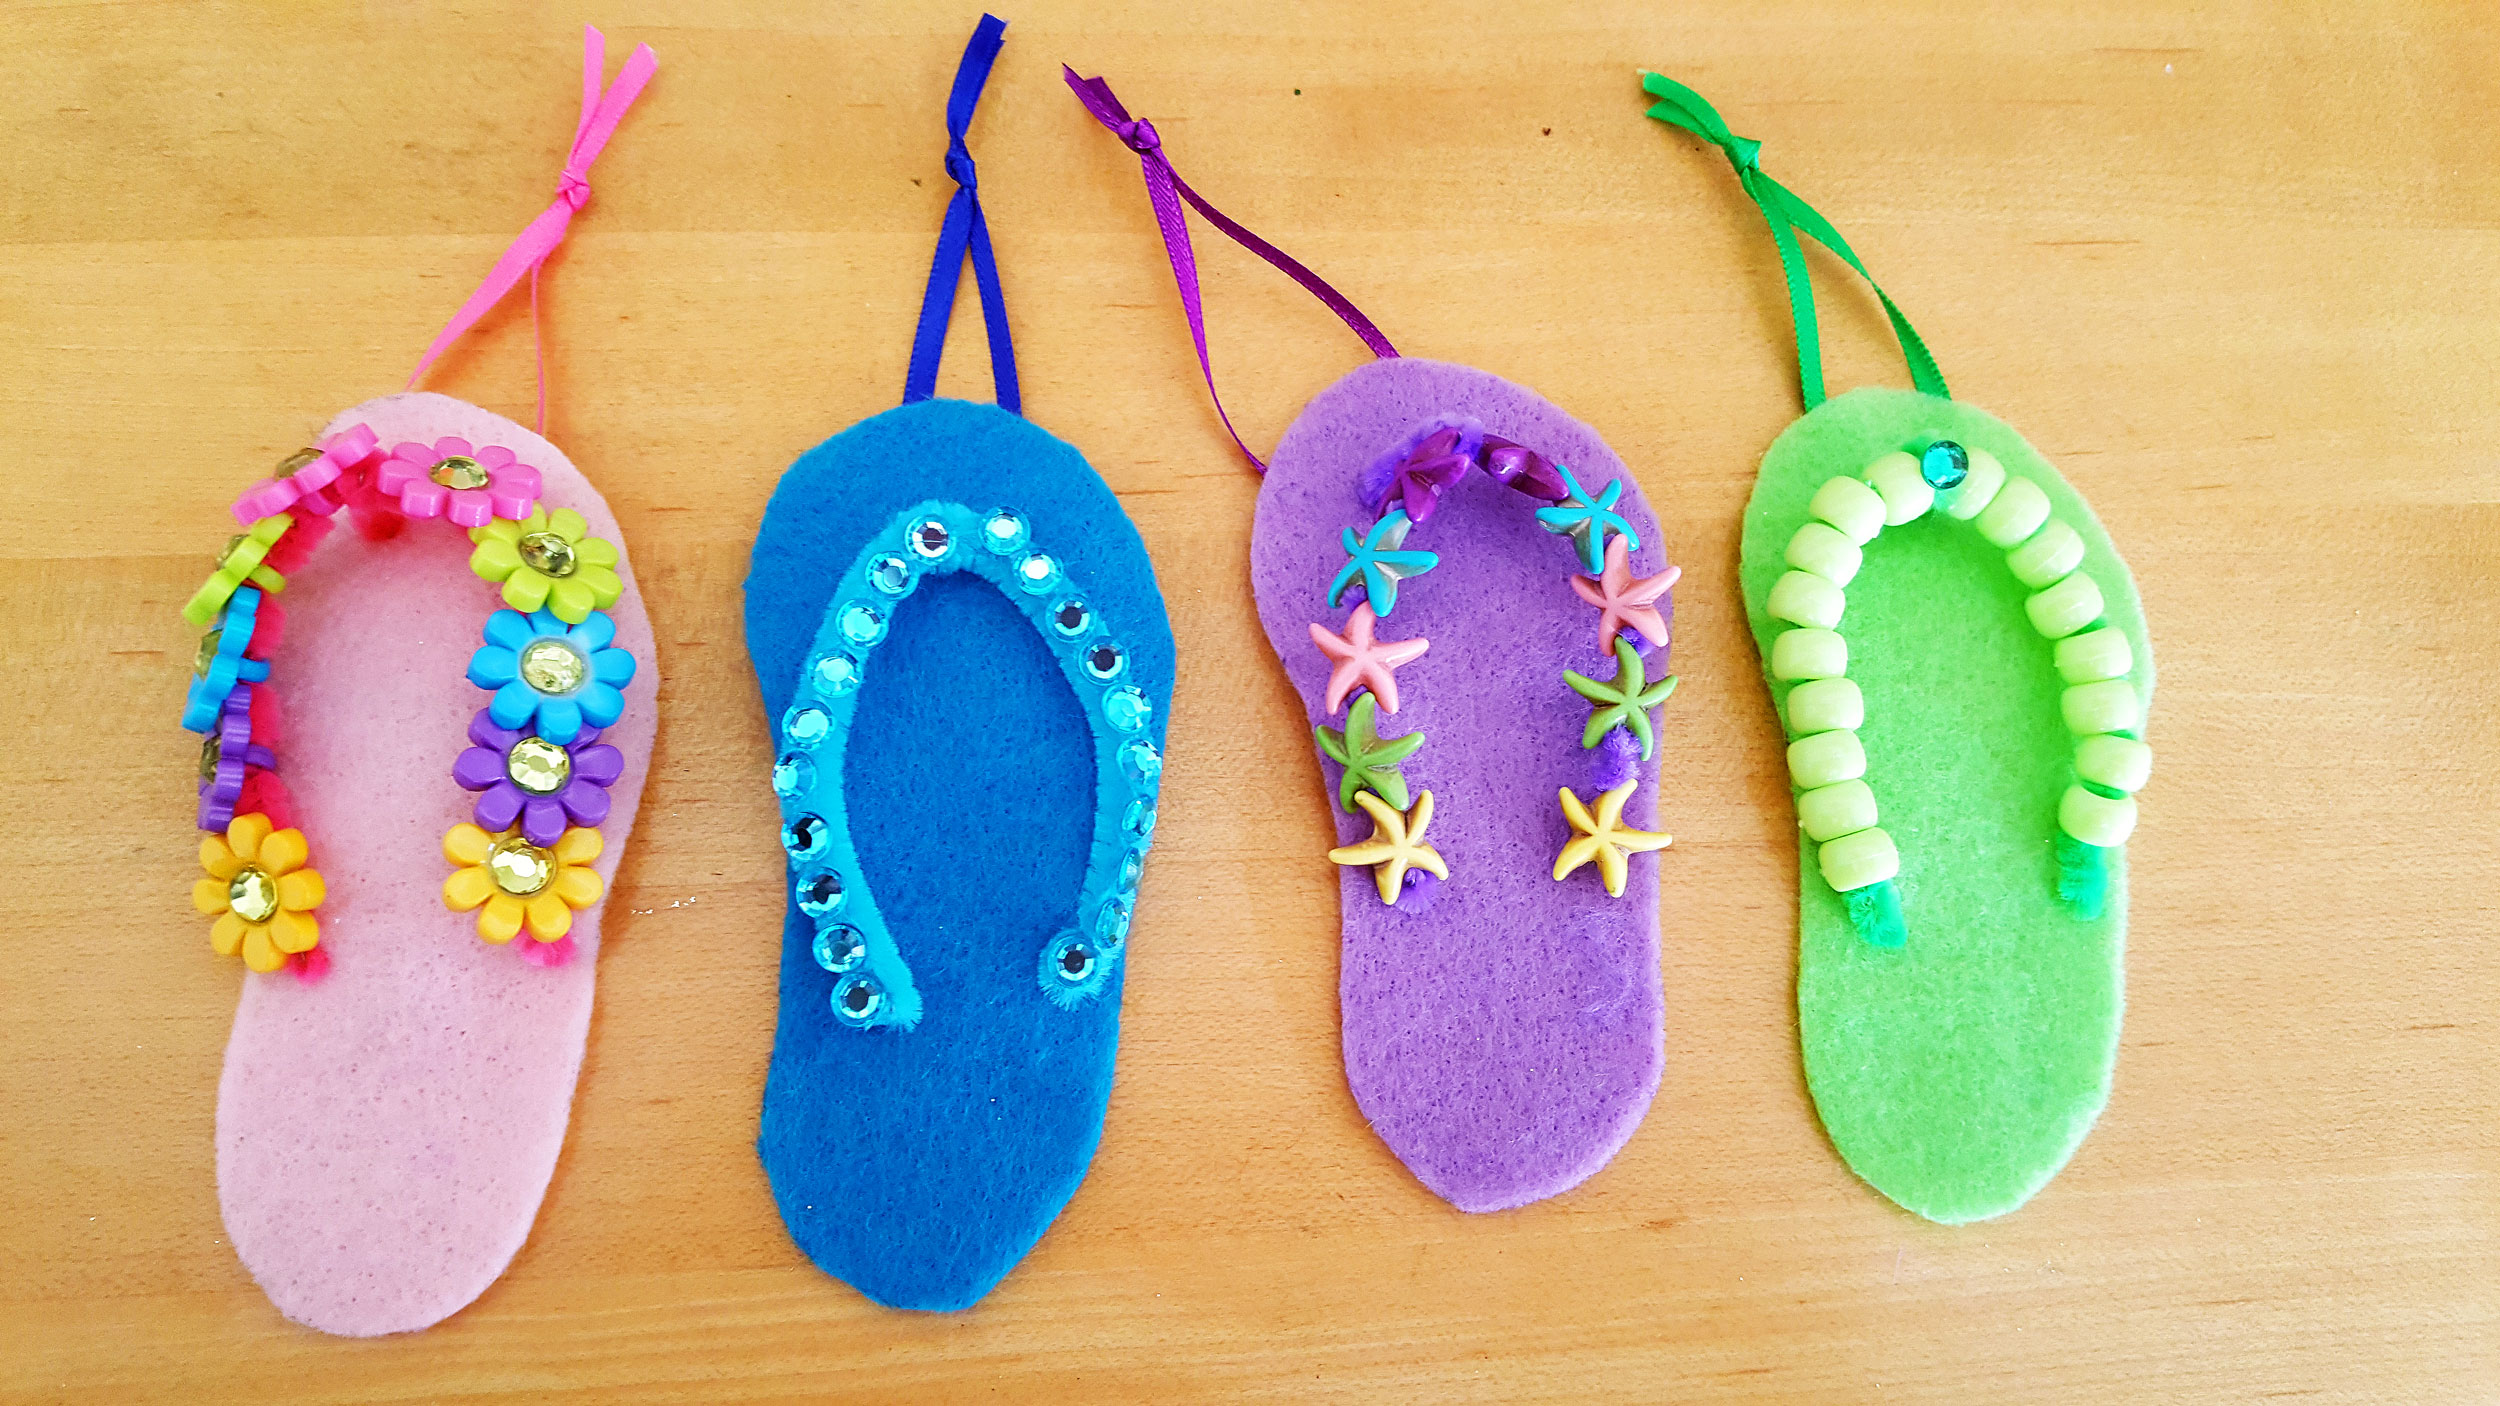 4 completed felt flip flops with pony beads and colorful ribbons. | OrnamentShop.com